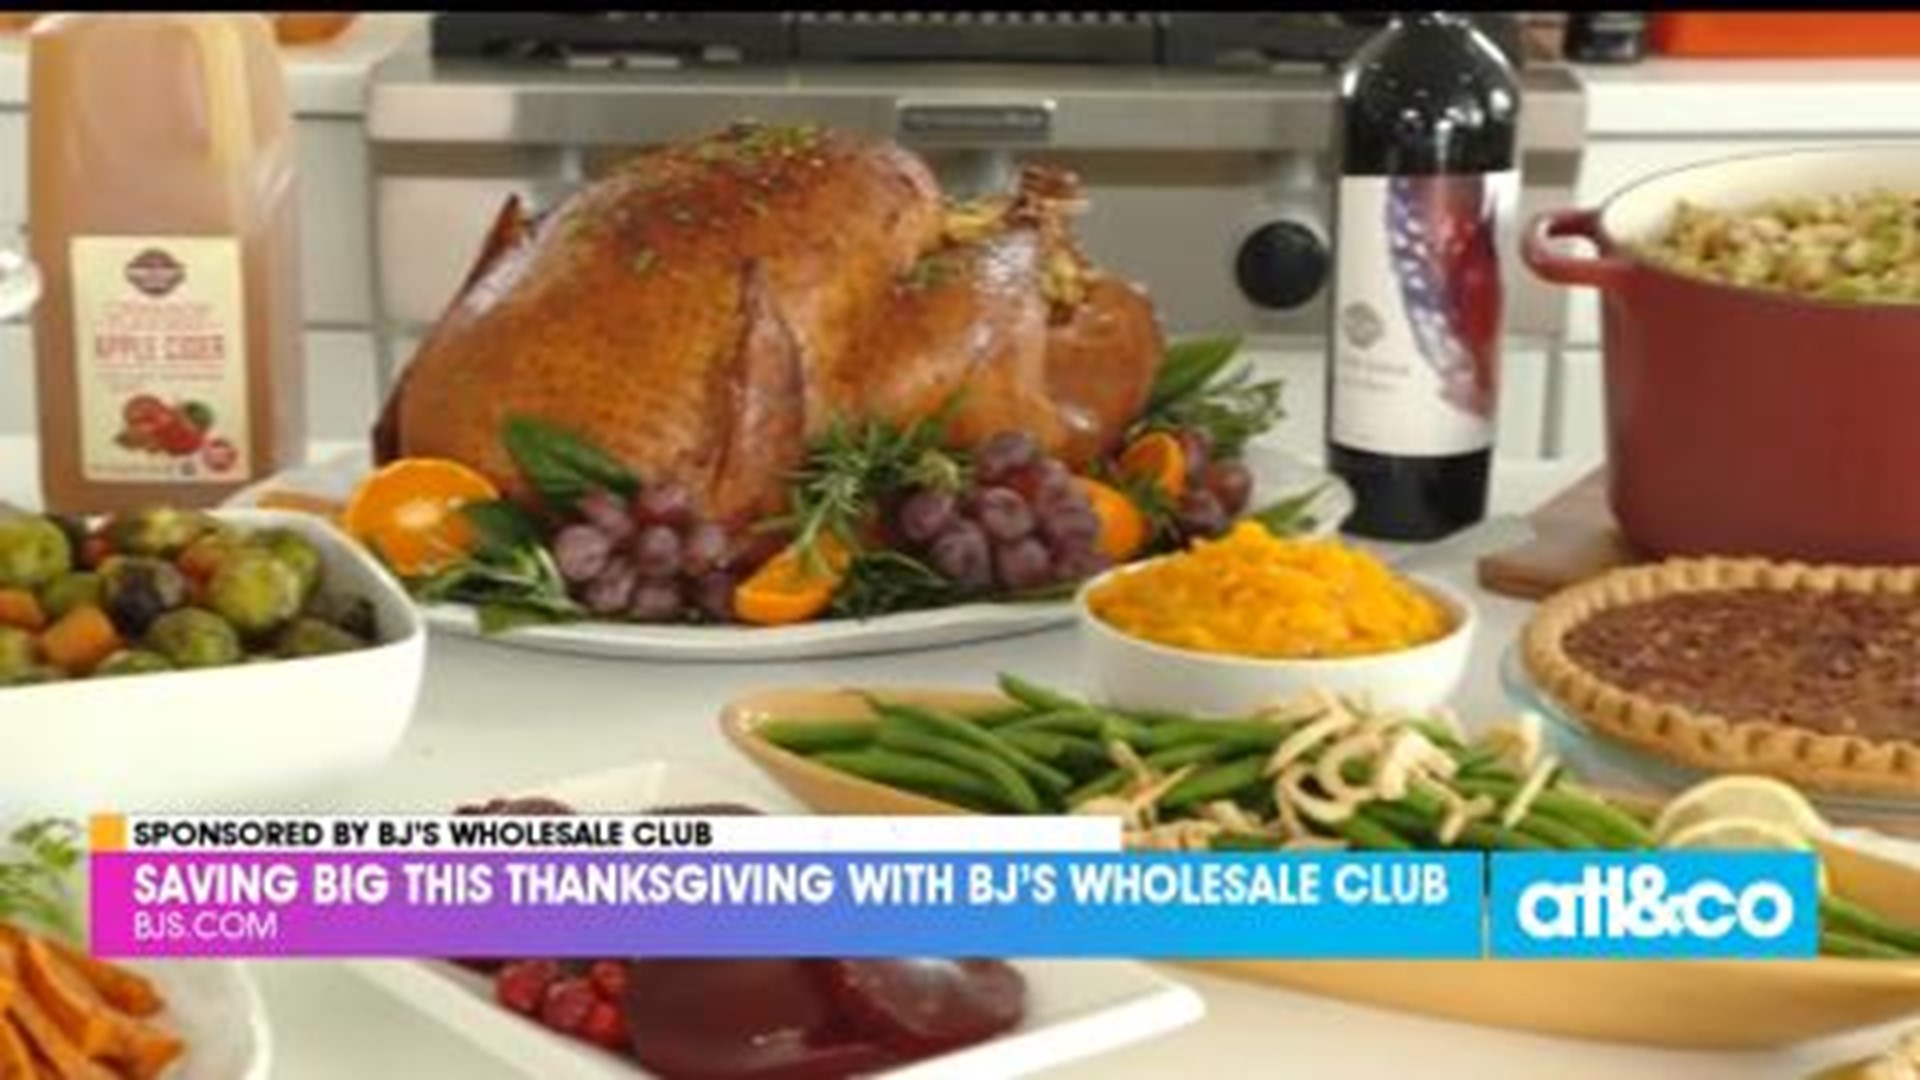 Audrey McClelland shares how you can make BJ’s Wholesale Club your one-stop shop for all your family’s holiday meals and save up to 25% off grocery store prices.